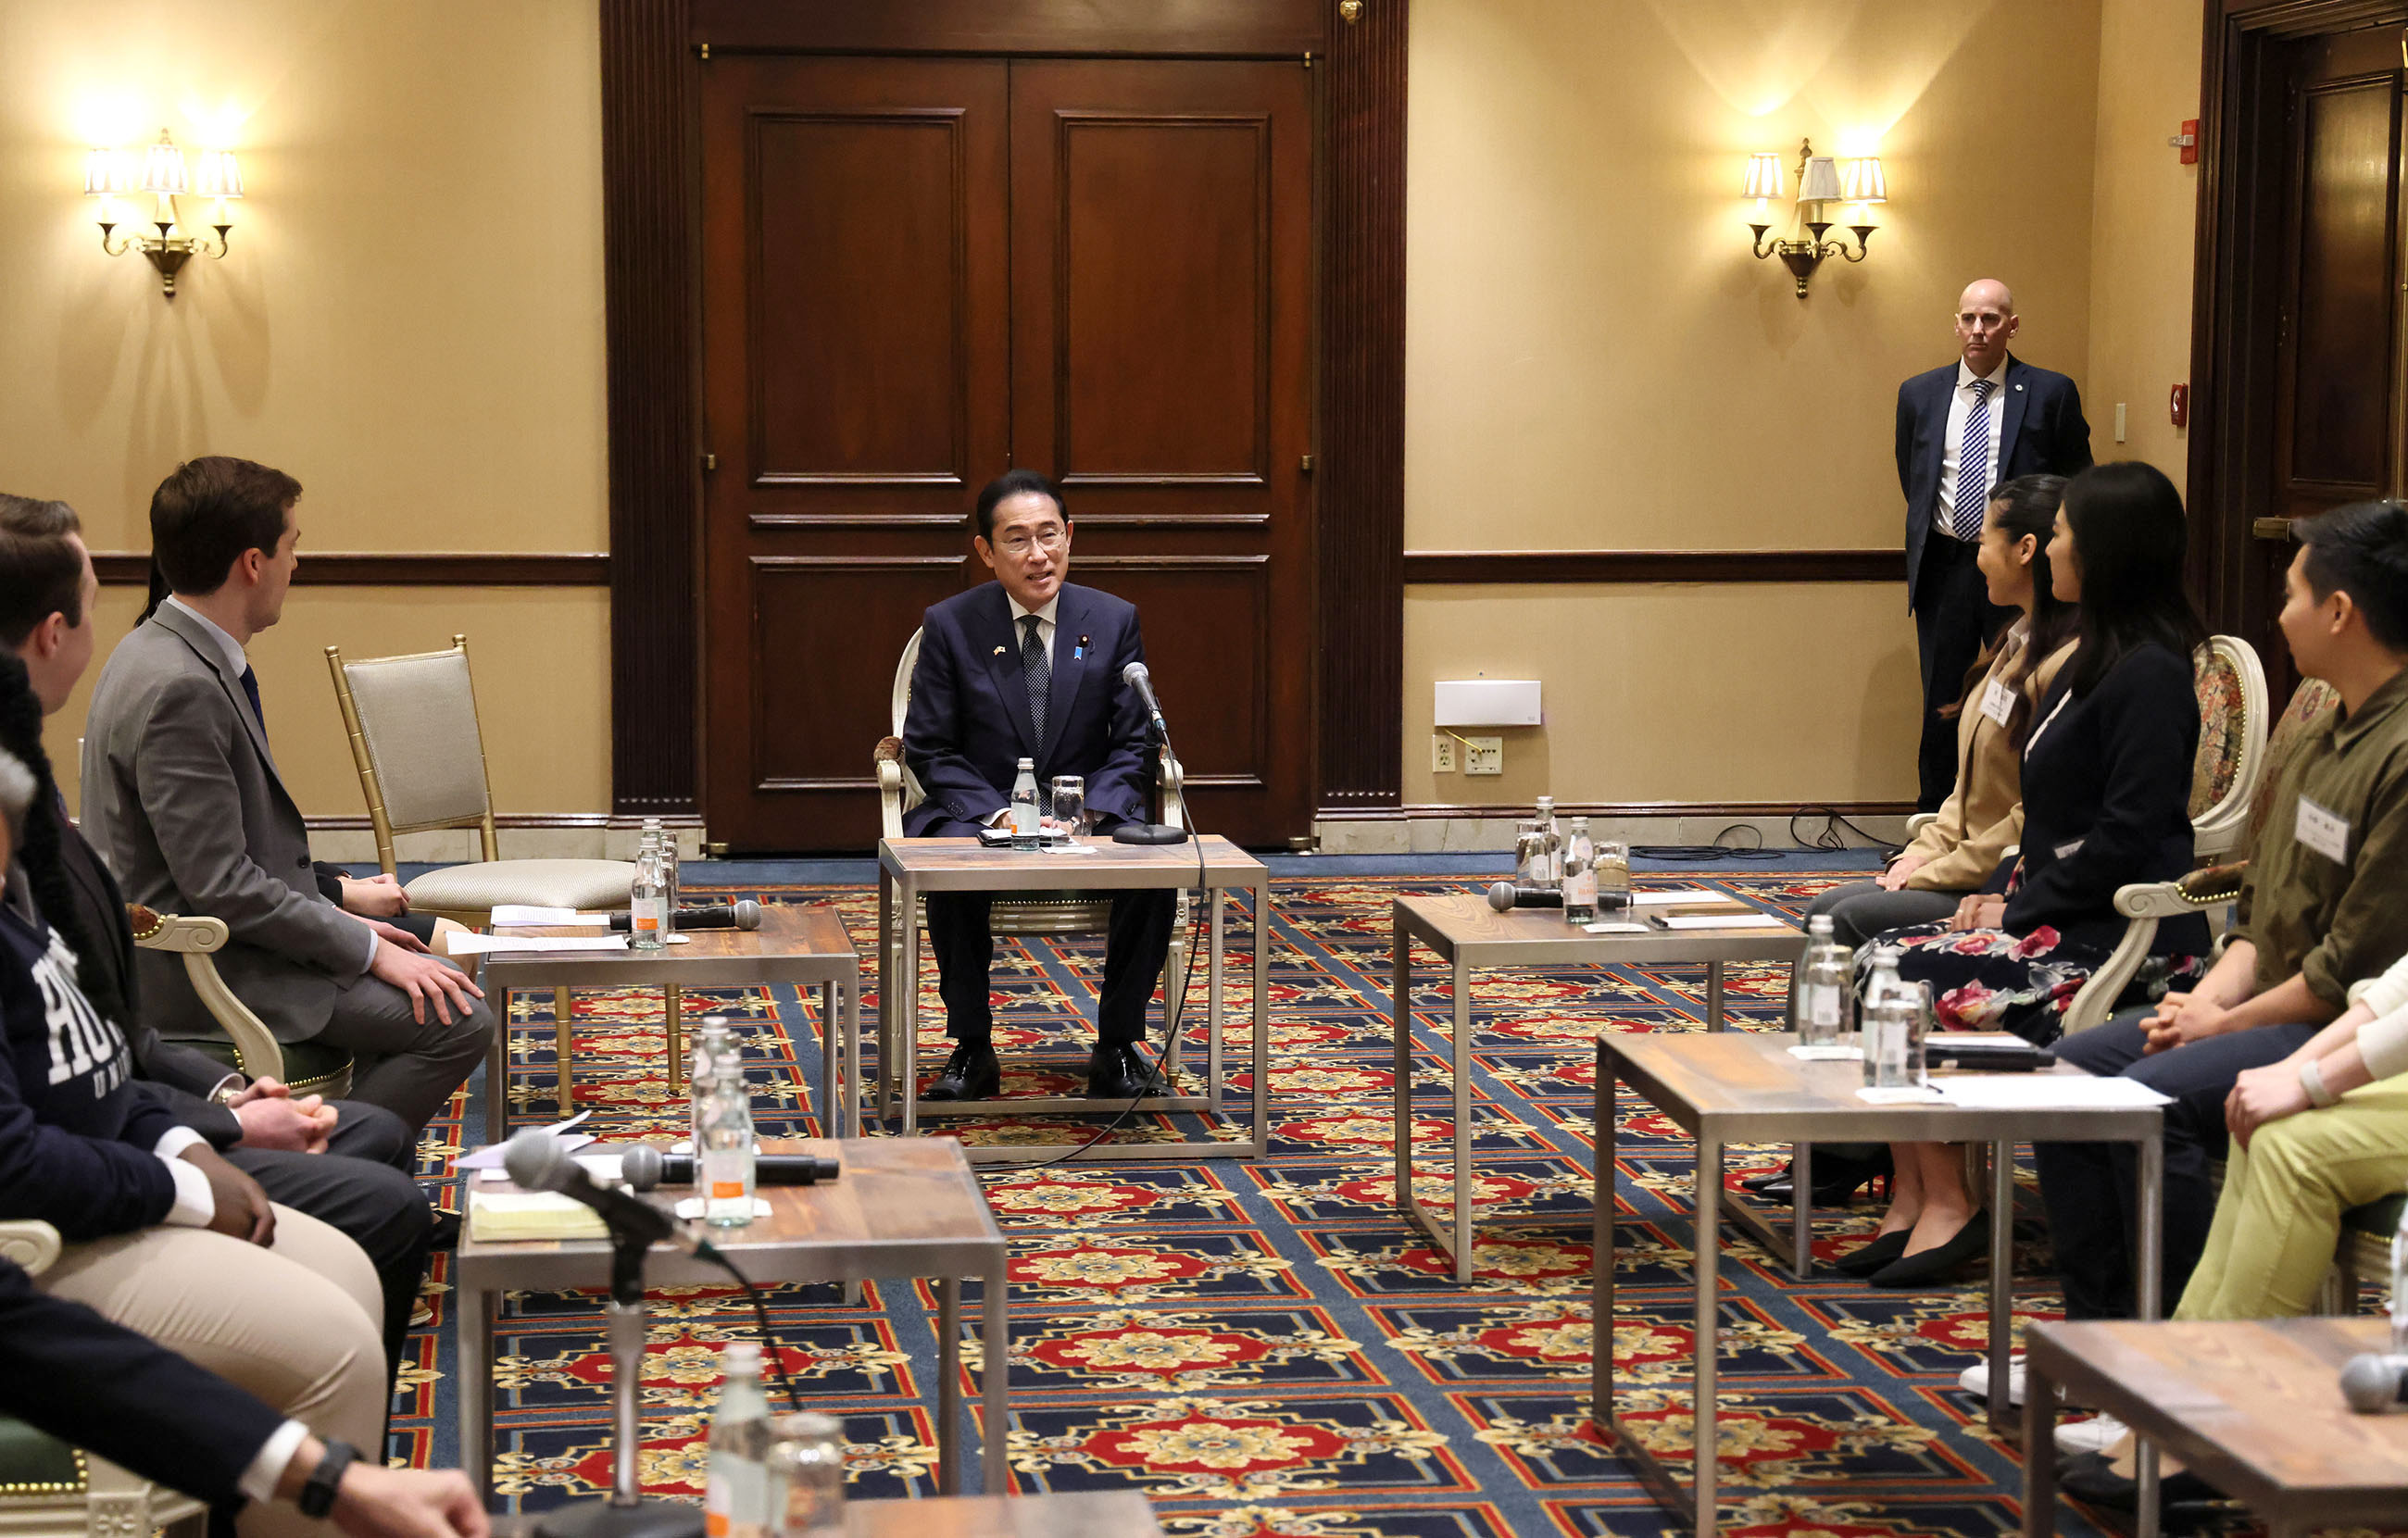 Prime Minister Kishida having a dialogue with the next generation for Japan- U.S. friendship and cooperation (1)